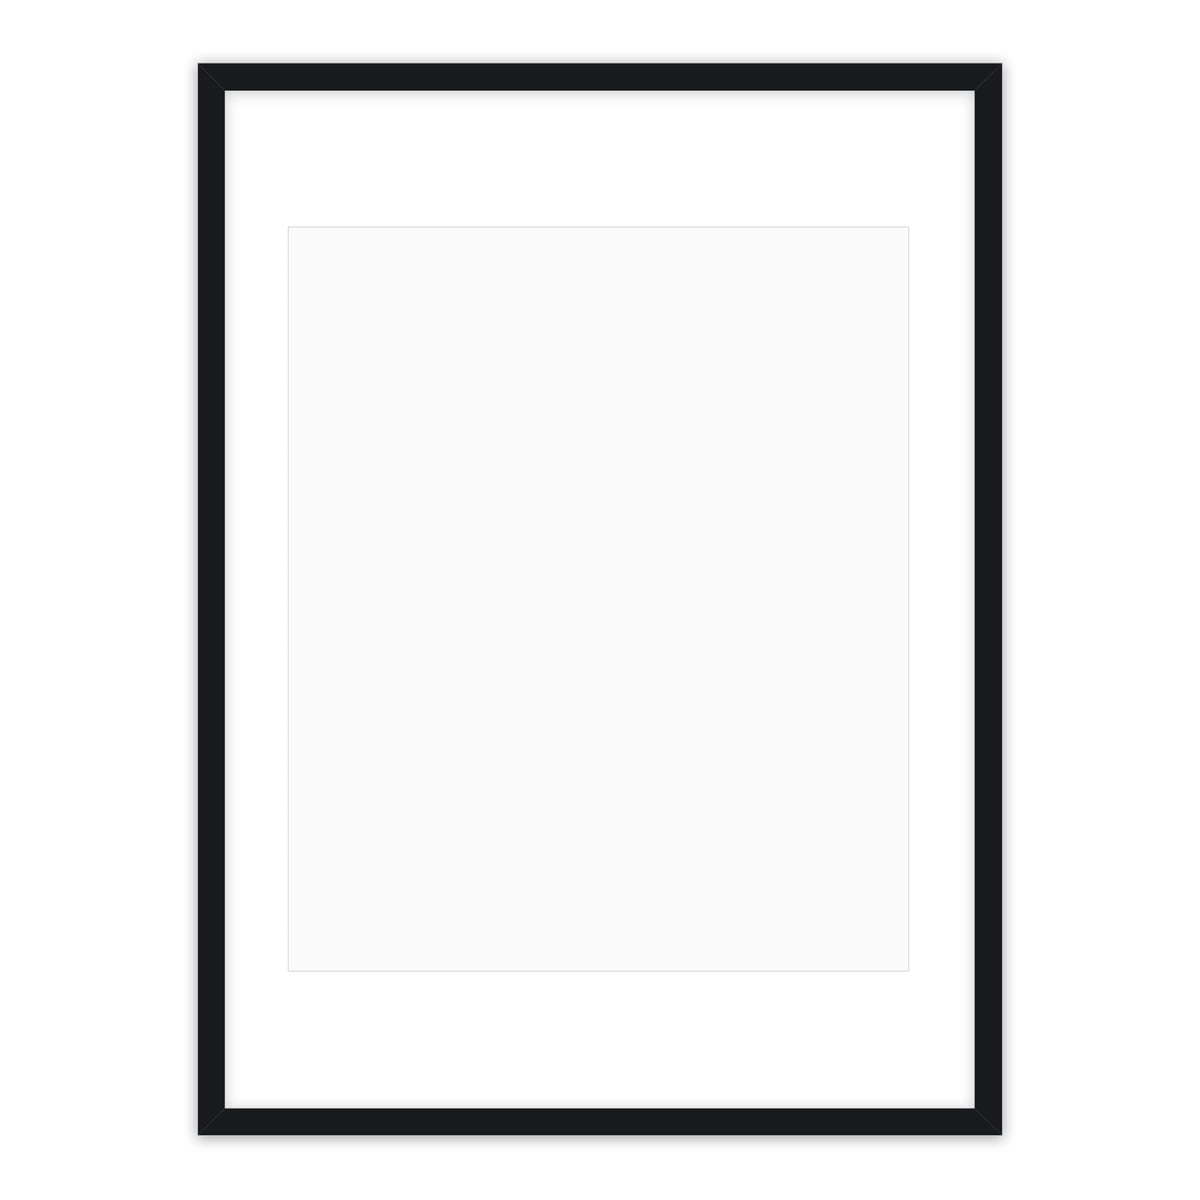 DELUXE35 Picture Frame 45x36 cm or 36x45 cm Photo/Gallery/Poster Frame 